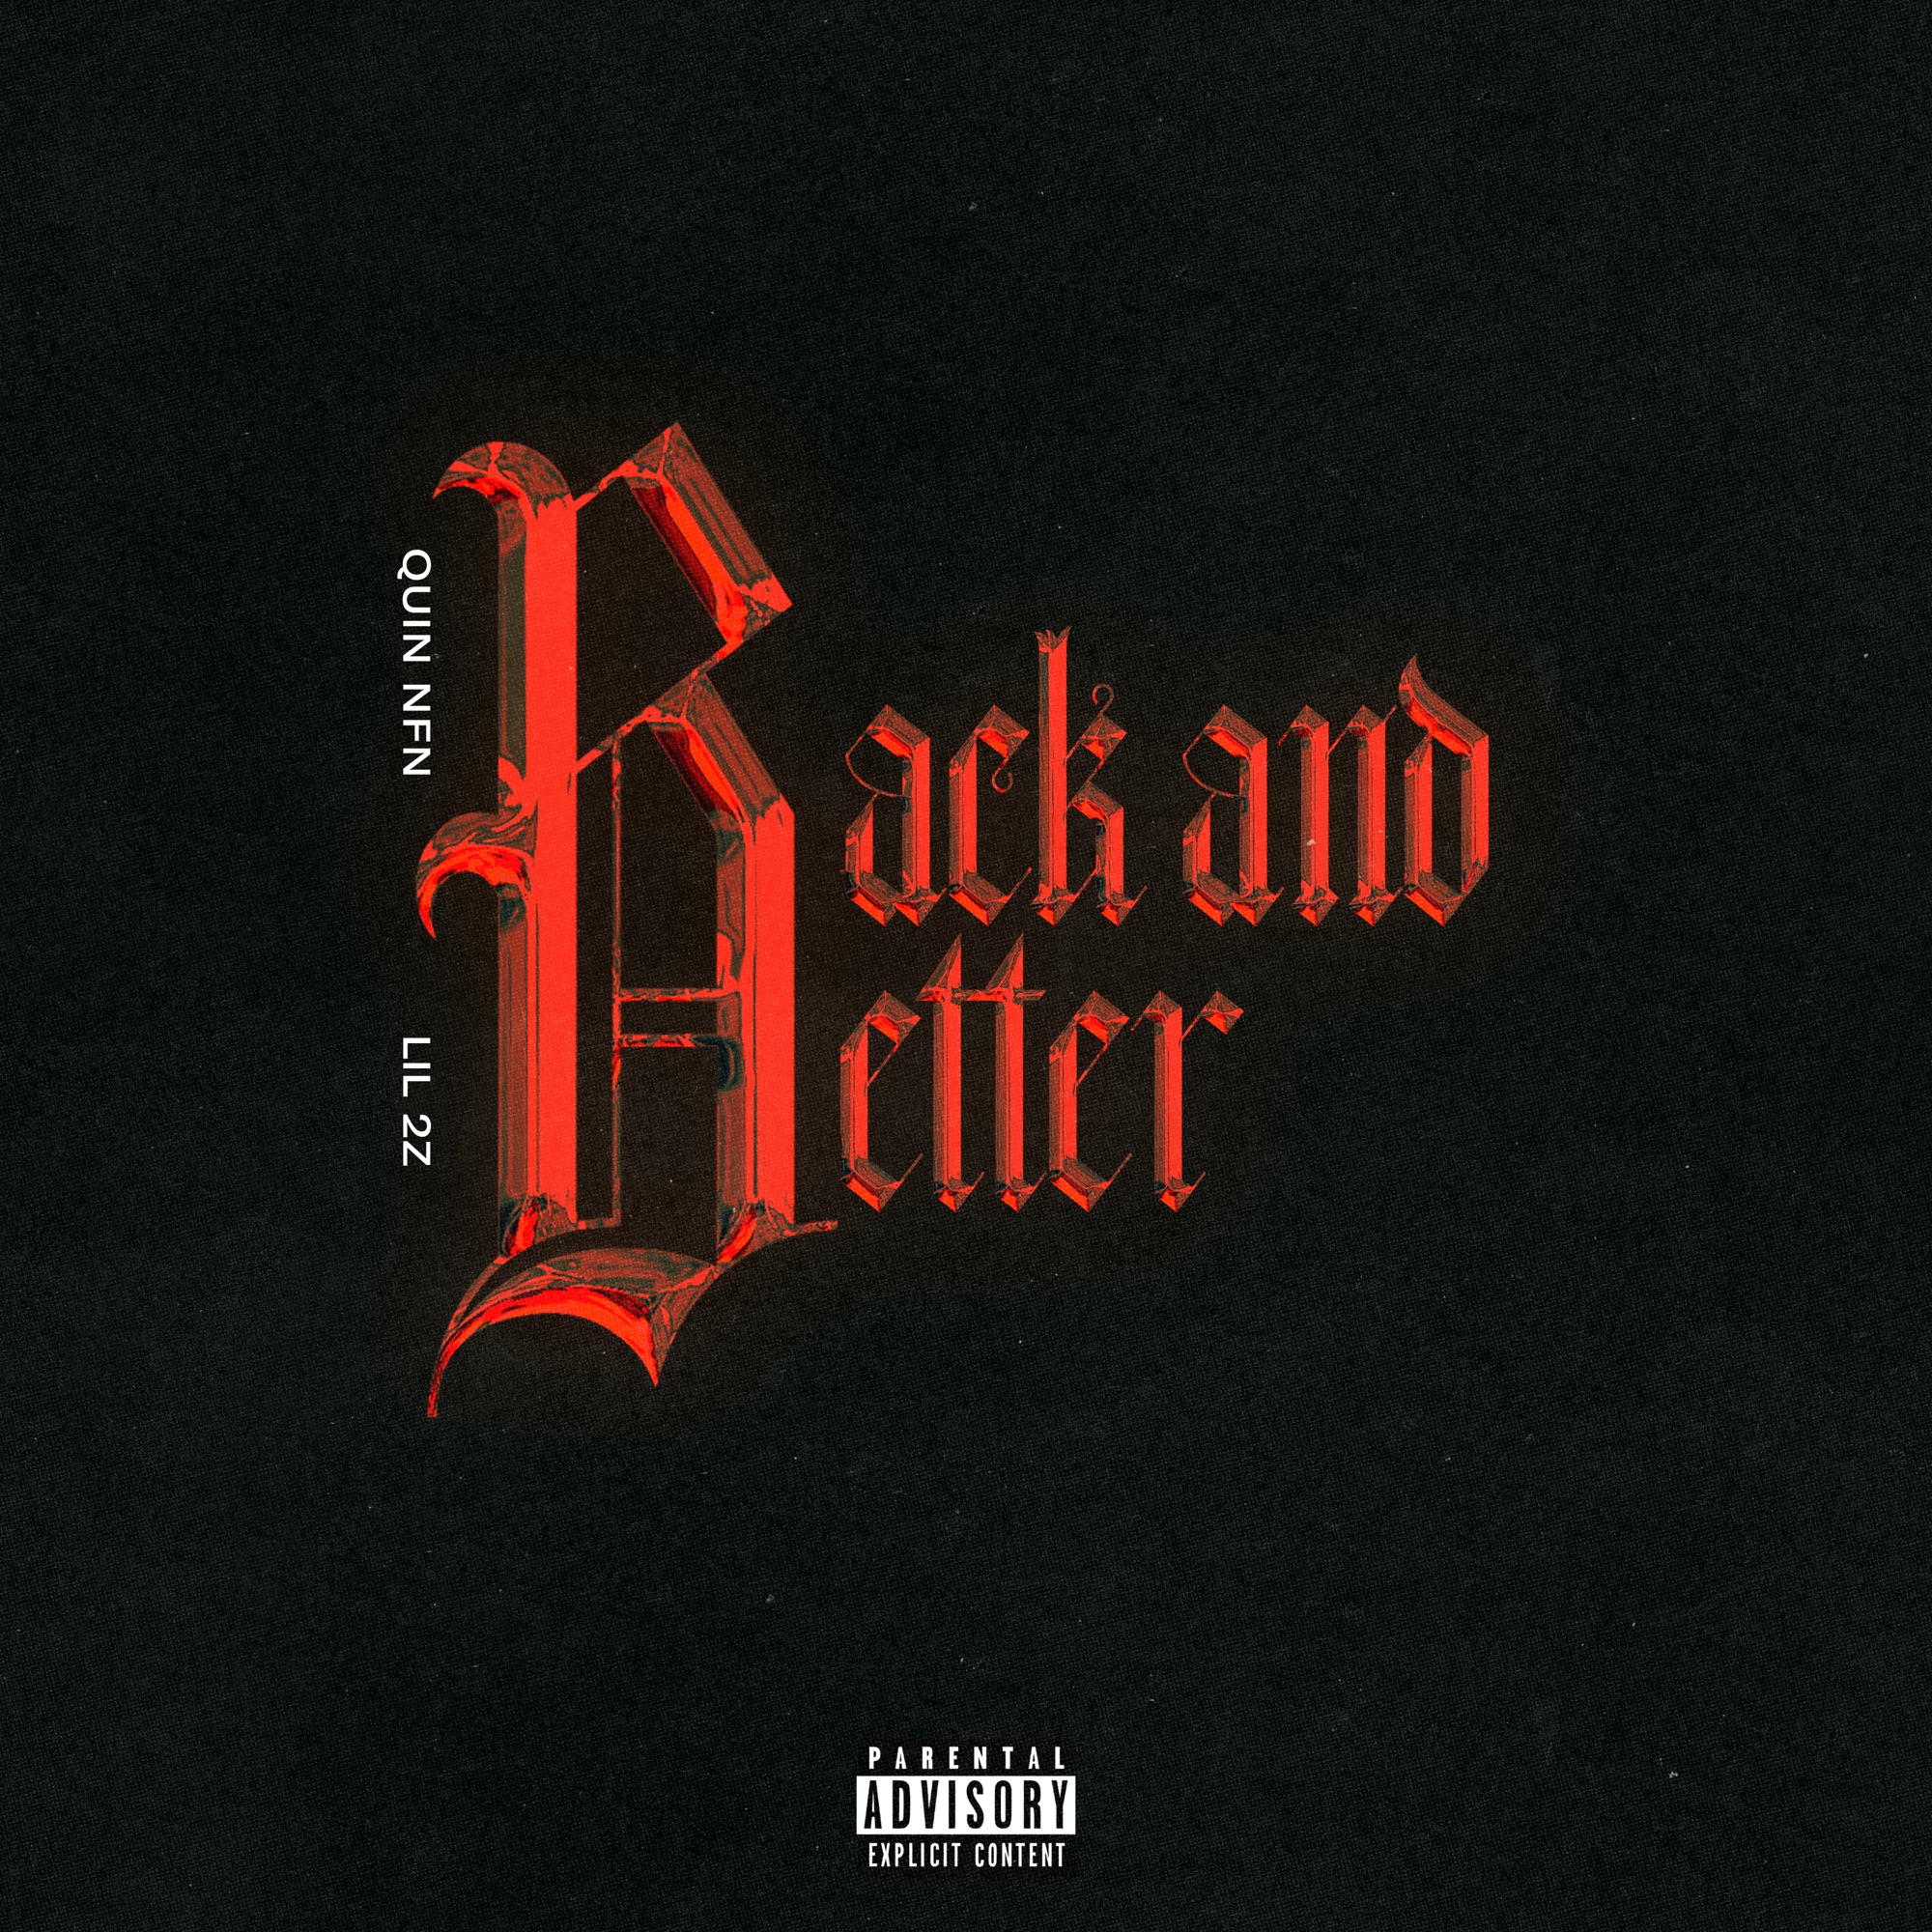 Quin NFN & Lil 2z - Back And Better - Single